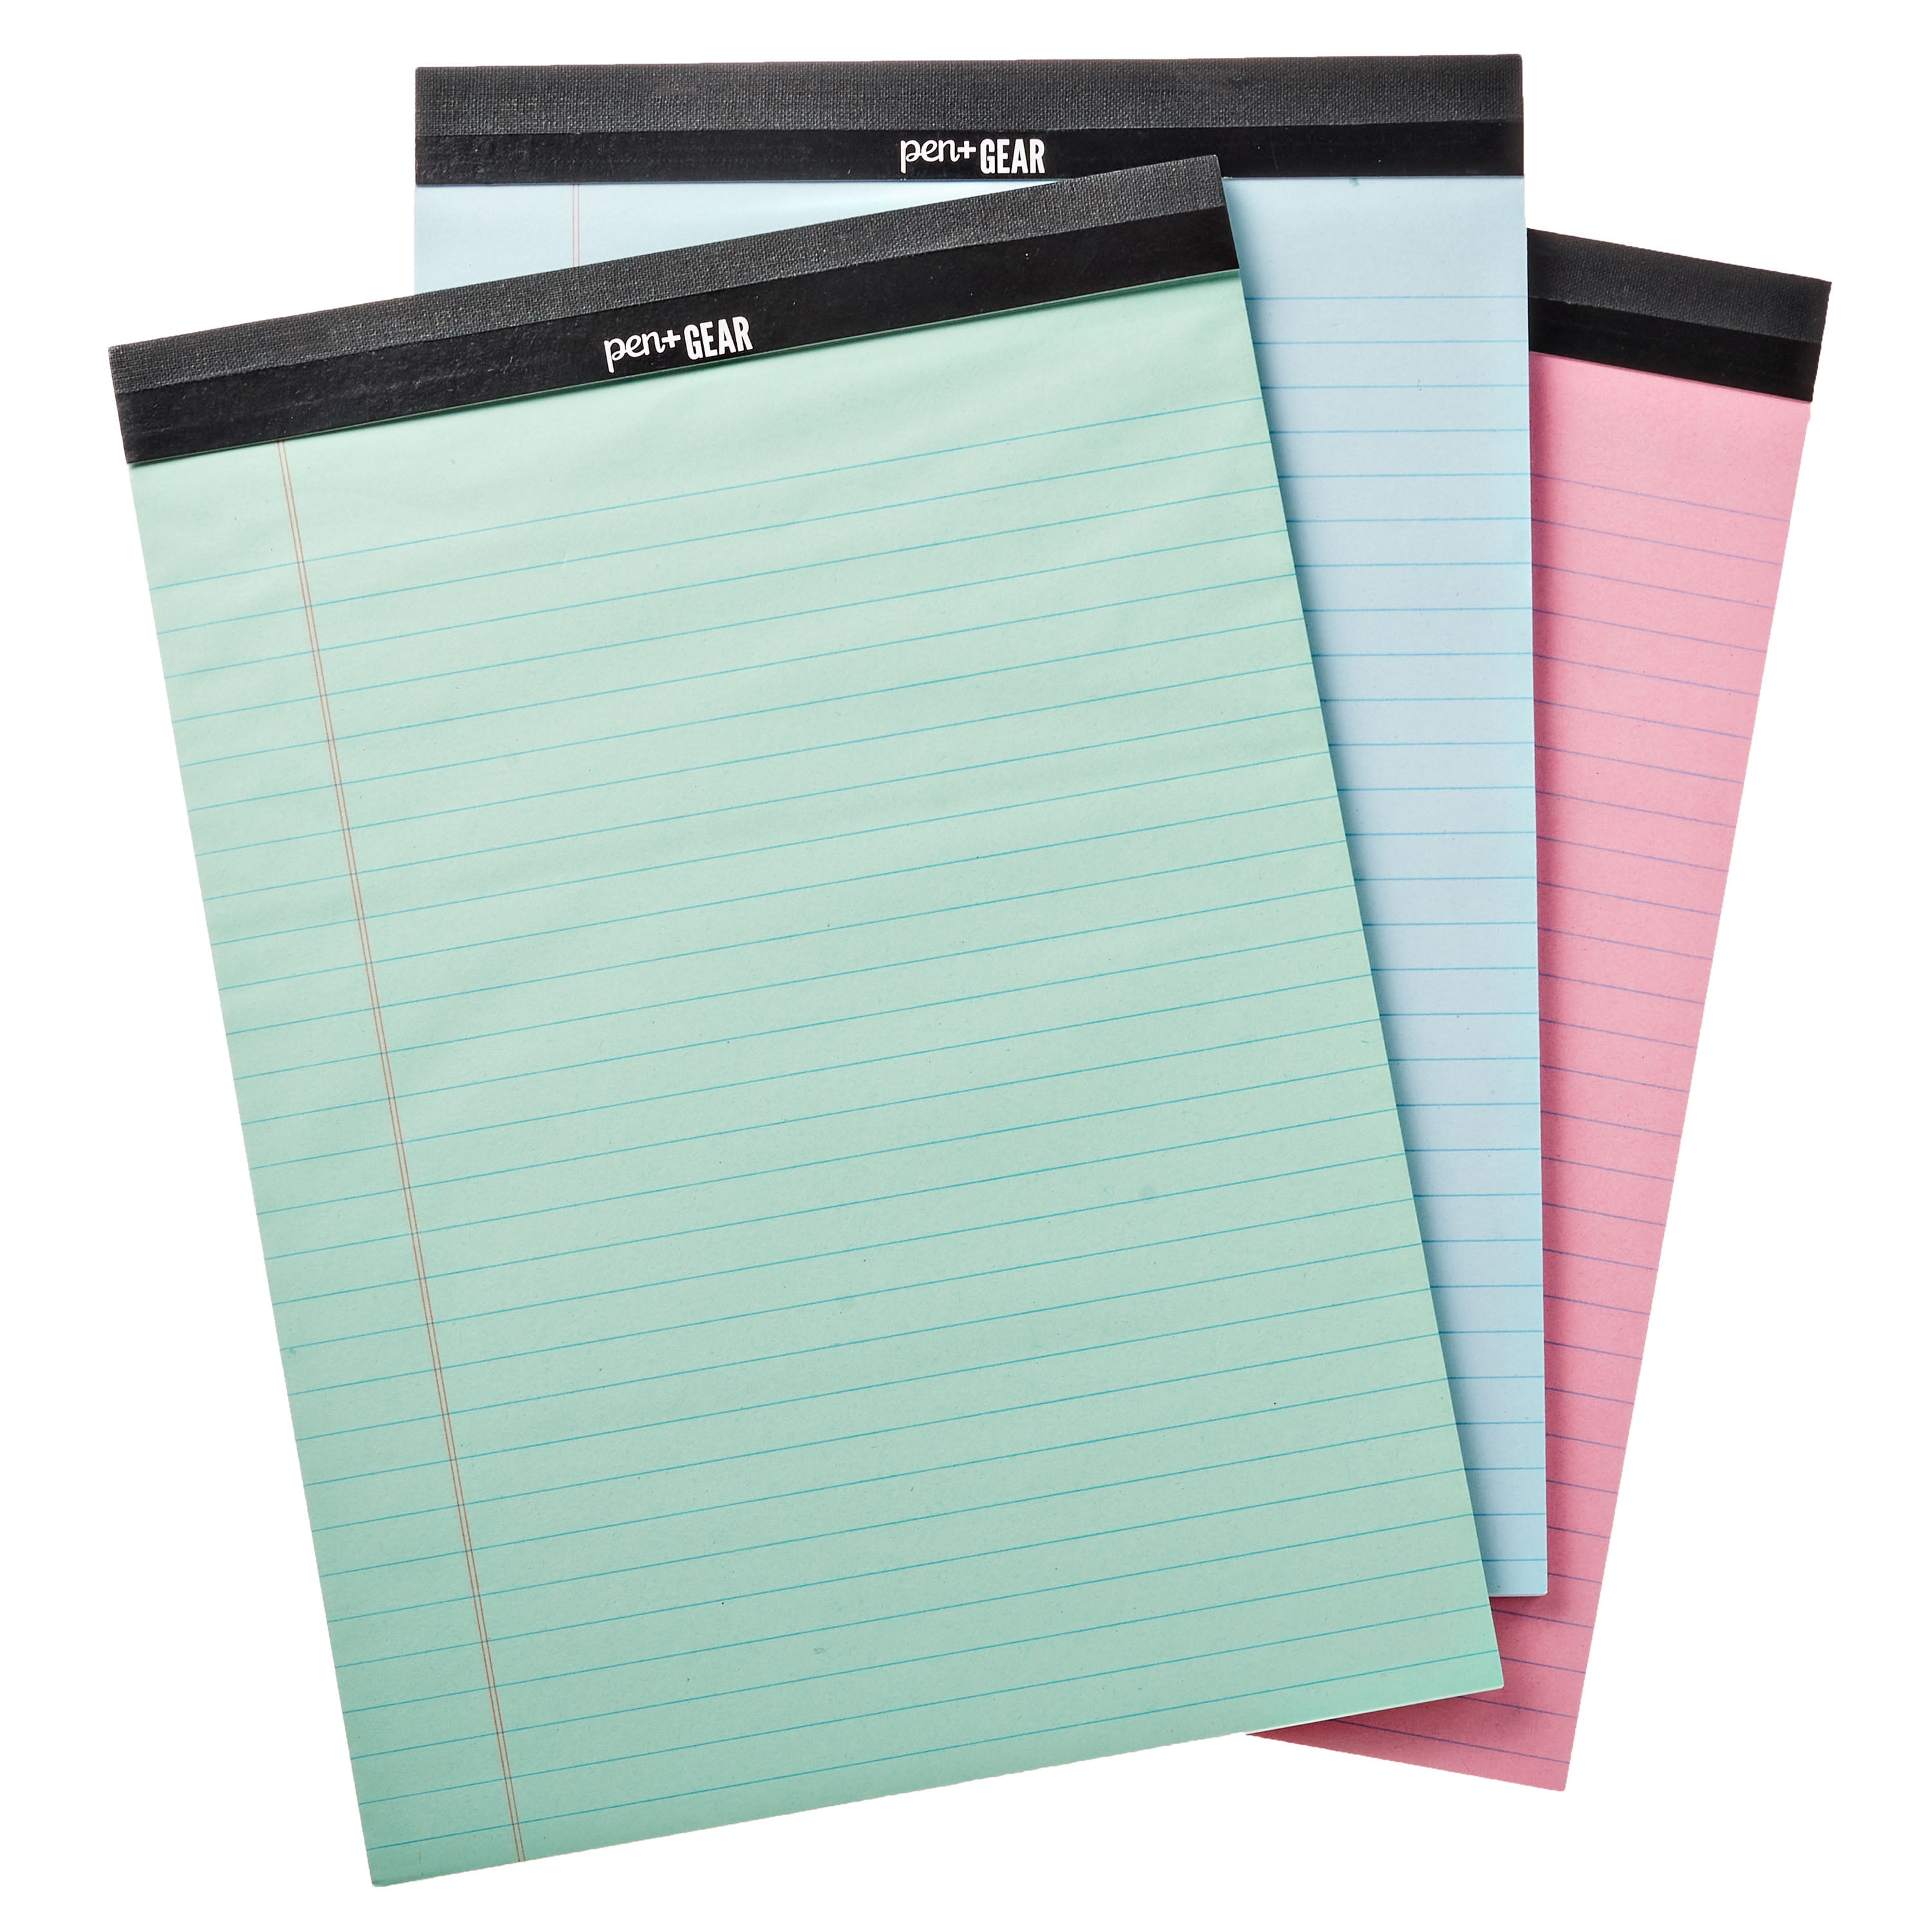 LLP Choose Papaya E1 Women's Art 4x7in 50 Lined Pages Little Legal List Pad 